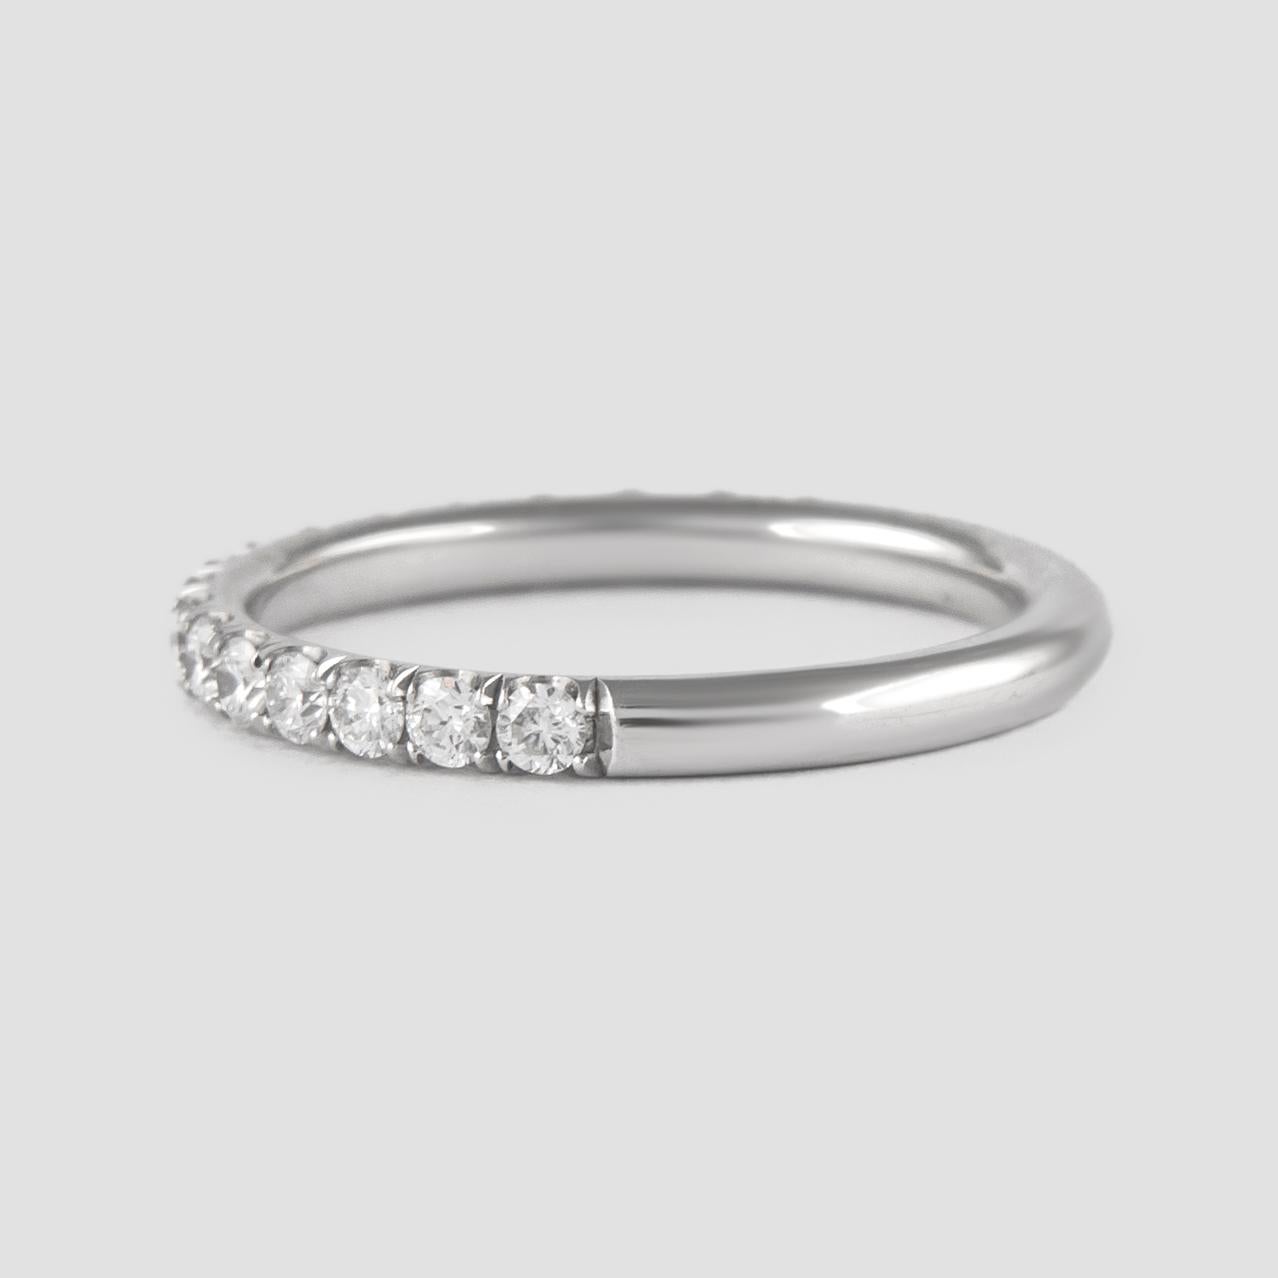 EGL 3.99 Carat Emerald Cut Diamond Ring with an Eternity Band 18k White Gold 2